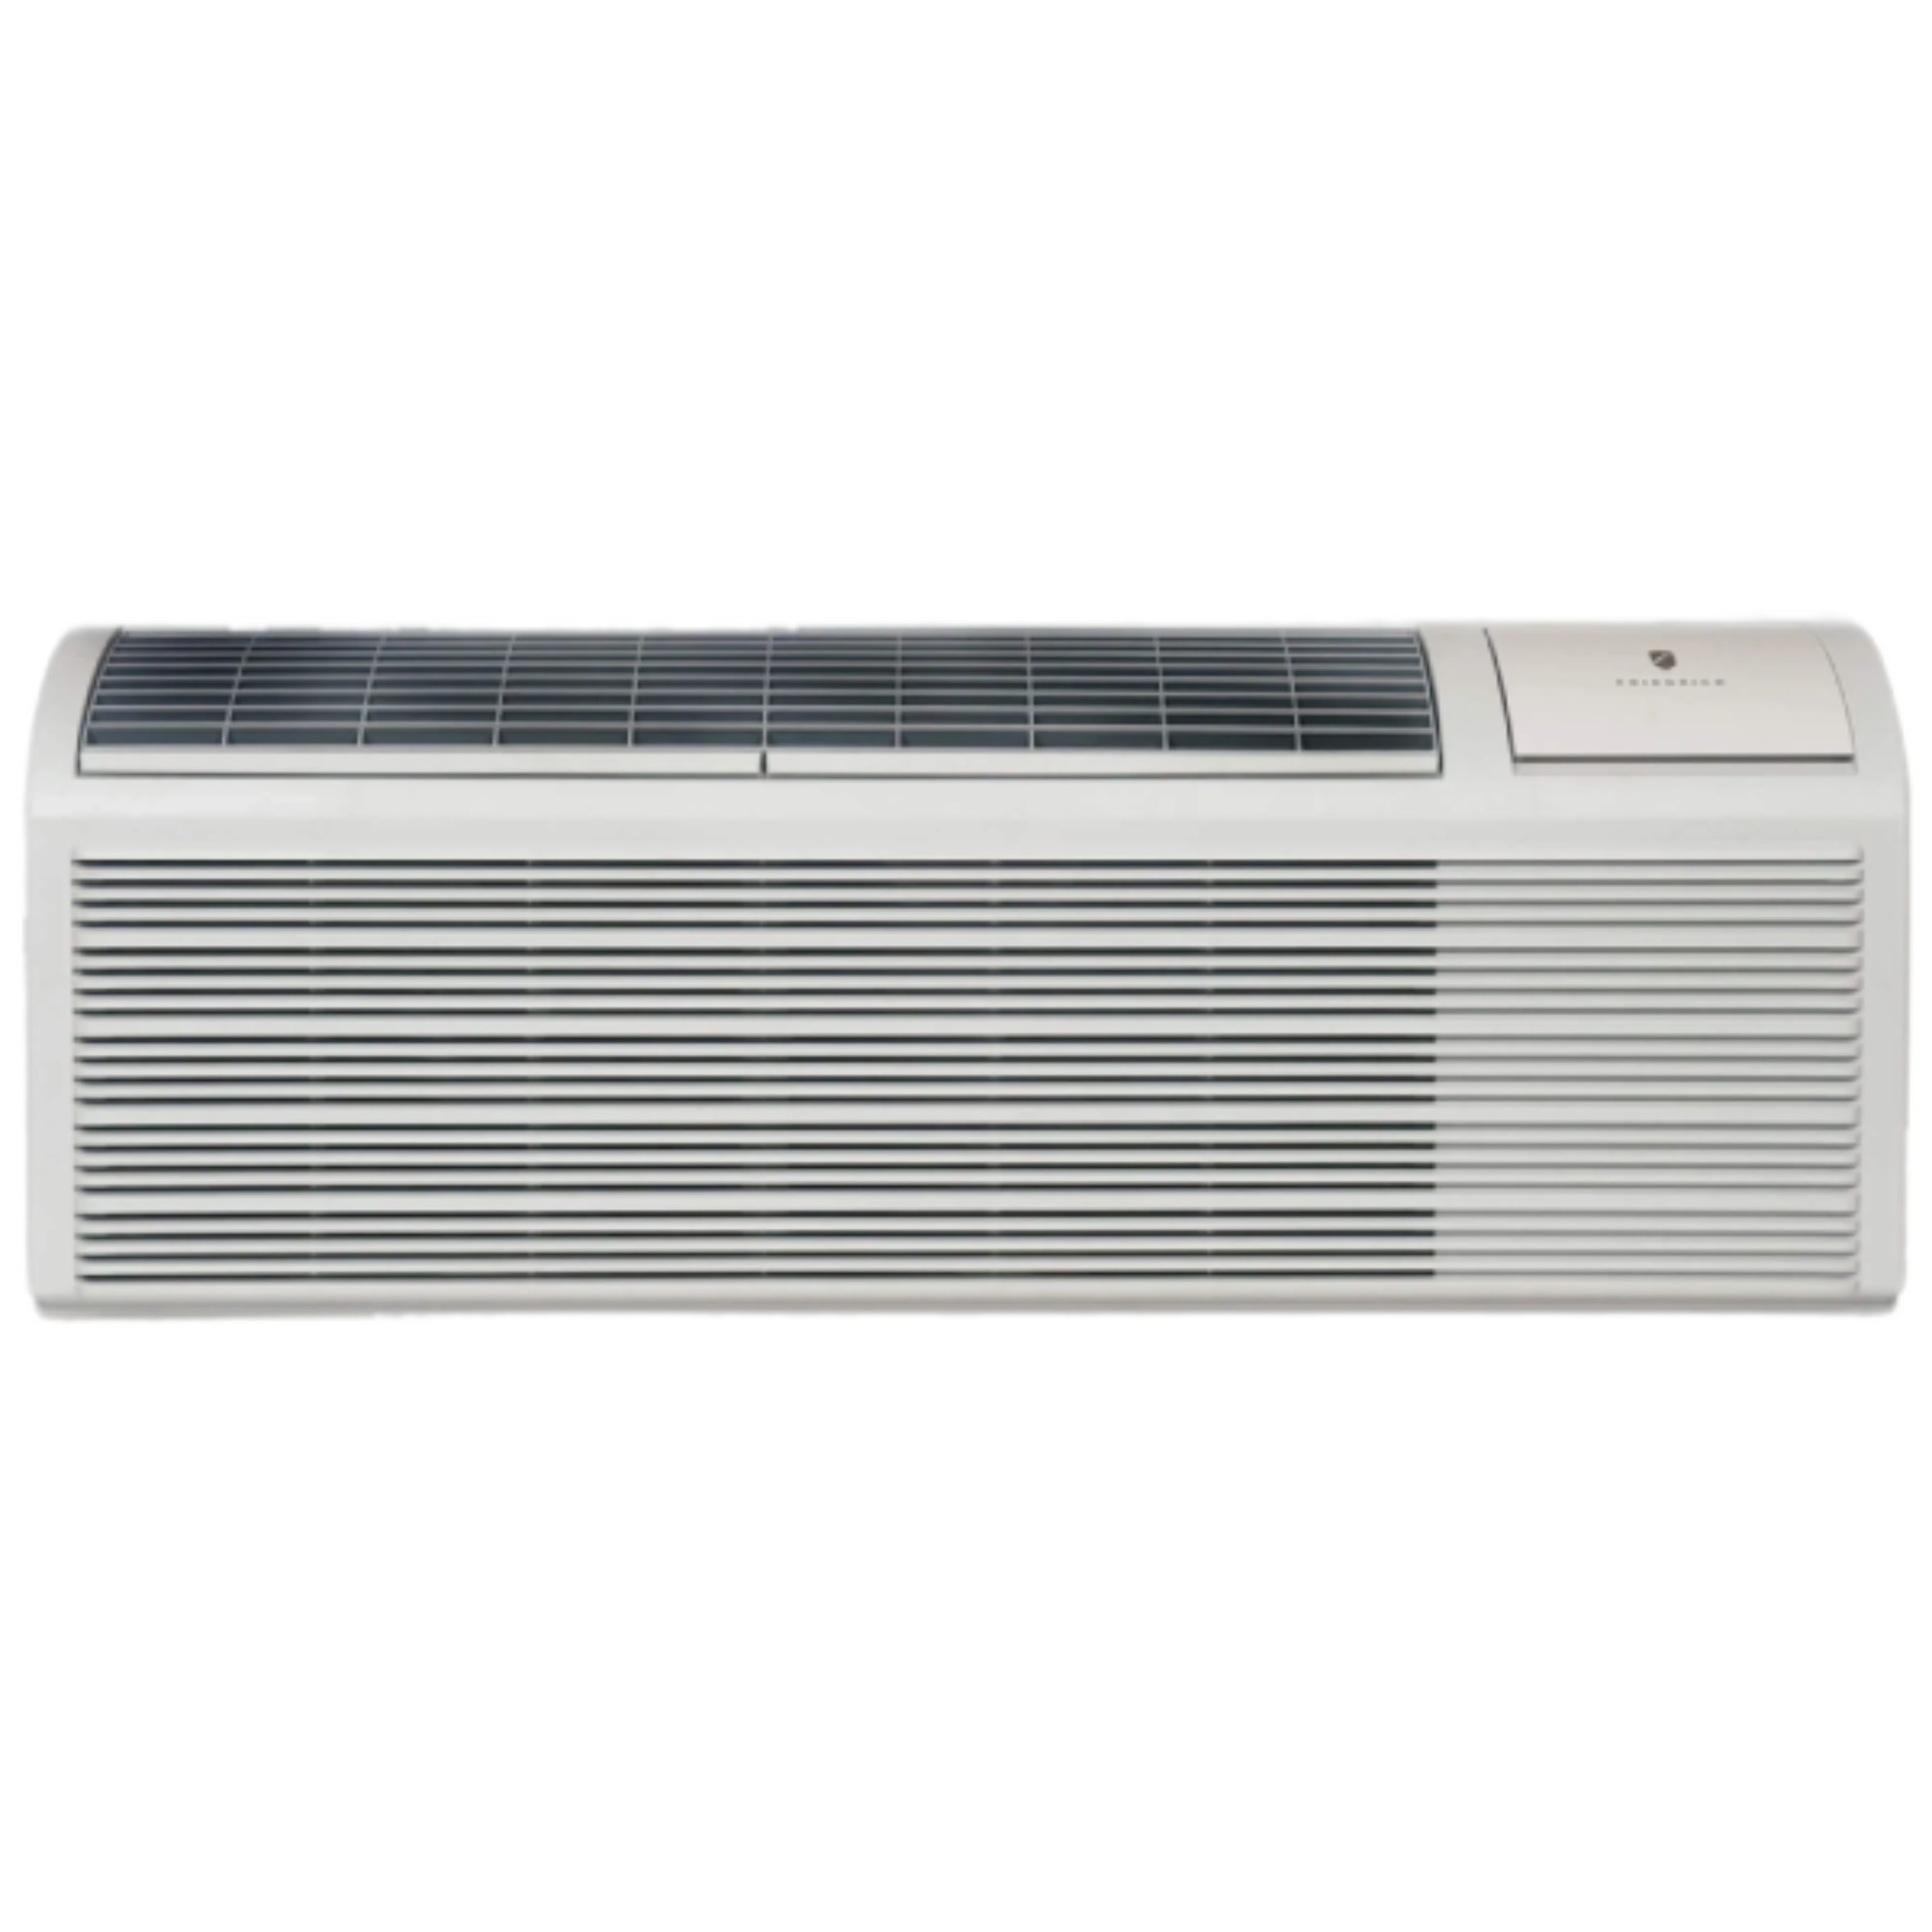 Friedrich ZoneAire Select Packaged Terminal Air Conditioner with Electric Heat Model PZE12R3SB, 10.6 EER, 265 V, 470 CFM, 12000 BTU